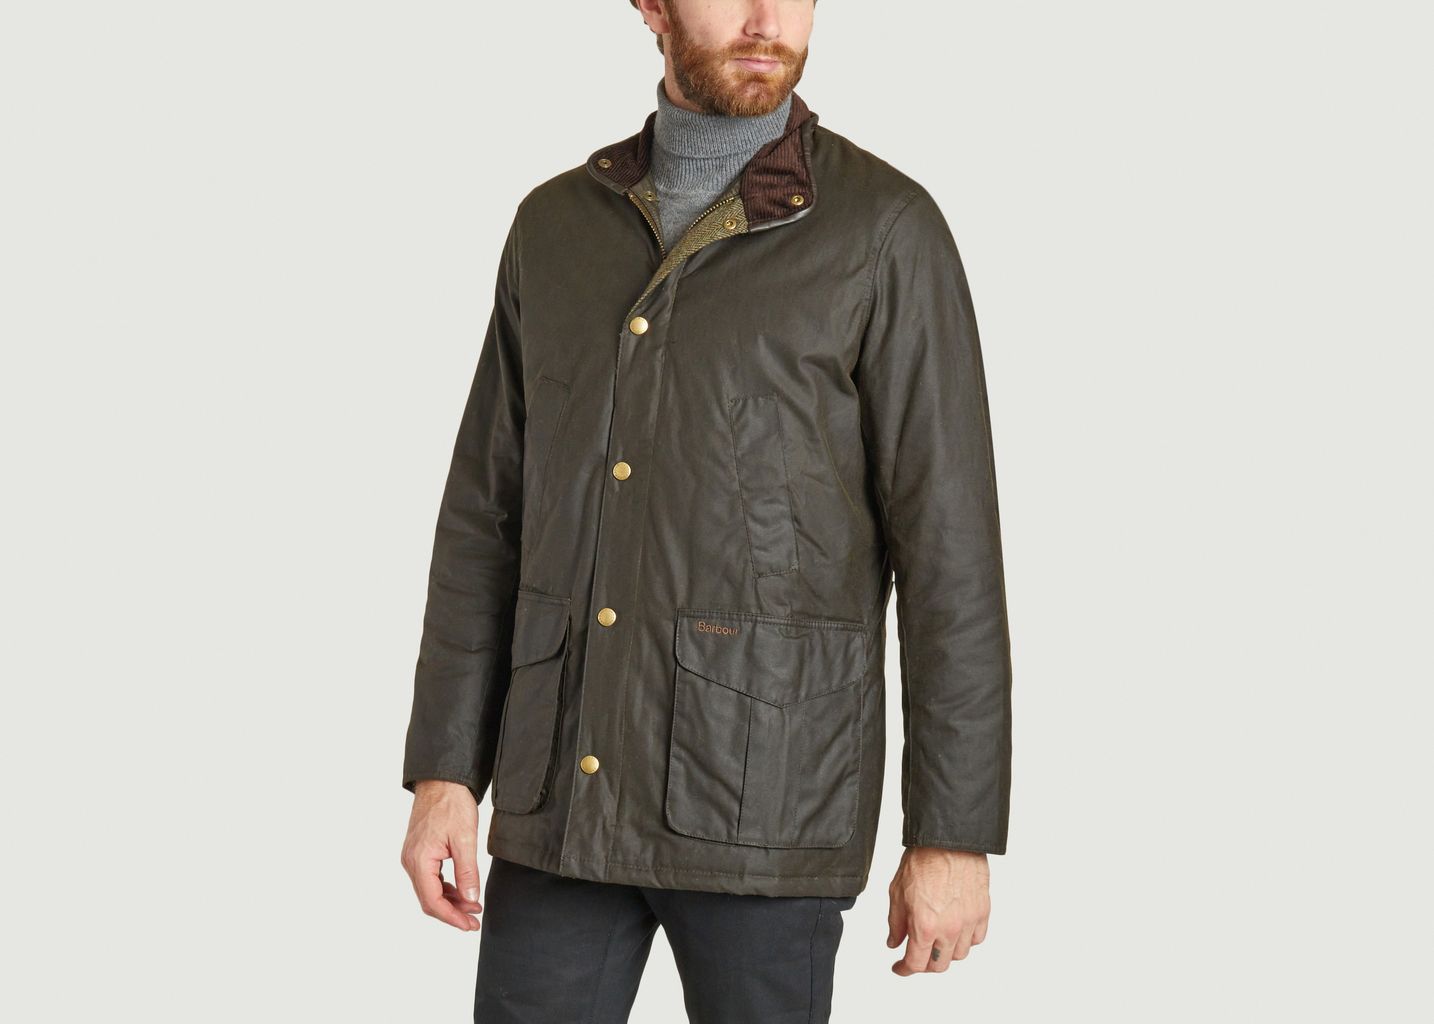 Hereford Wax Jacket - Barbour